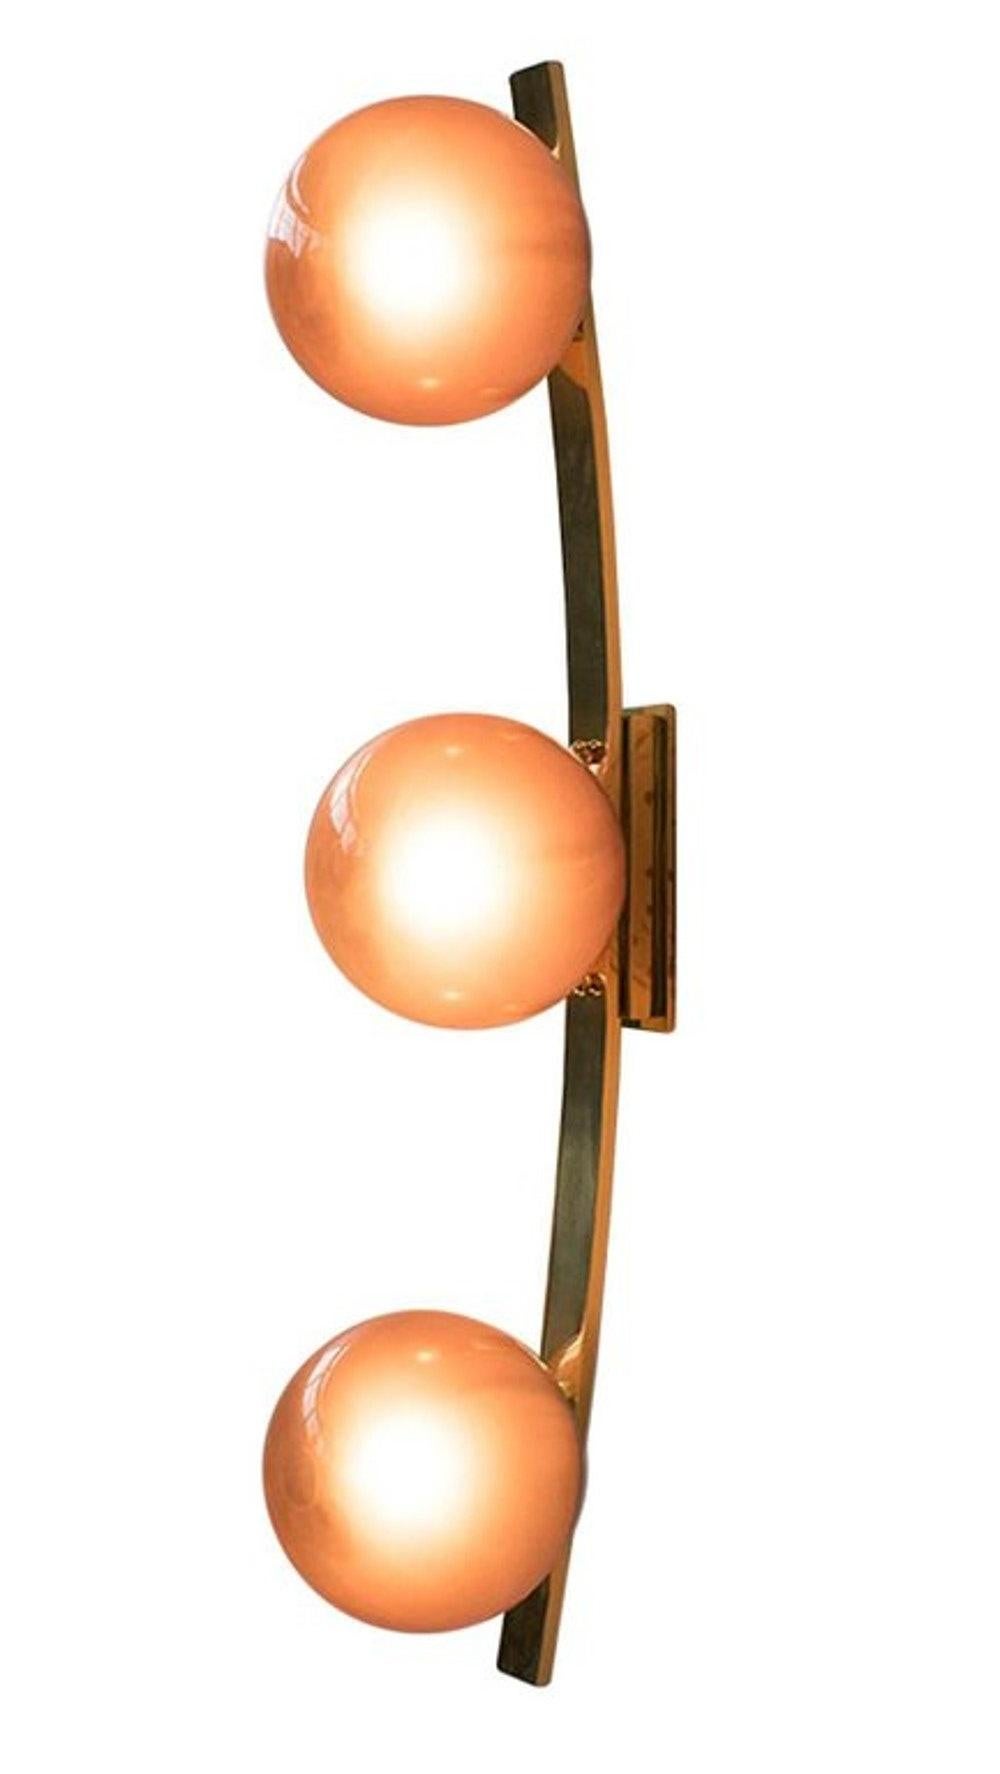 Italian Murano wall light or flushmount with hand blown frosted amethyst Murano glass globes, mounted on curved polished brass finish frame / Designed by Fabio Bergomi / Made in Italy
3 lights / E12 or E14 type / max 40W each
Measures: Height 31.5